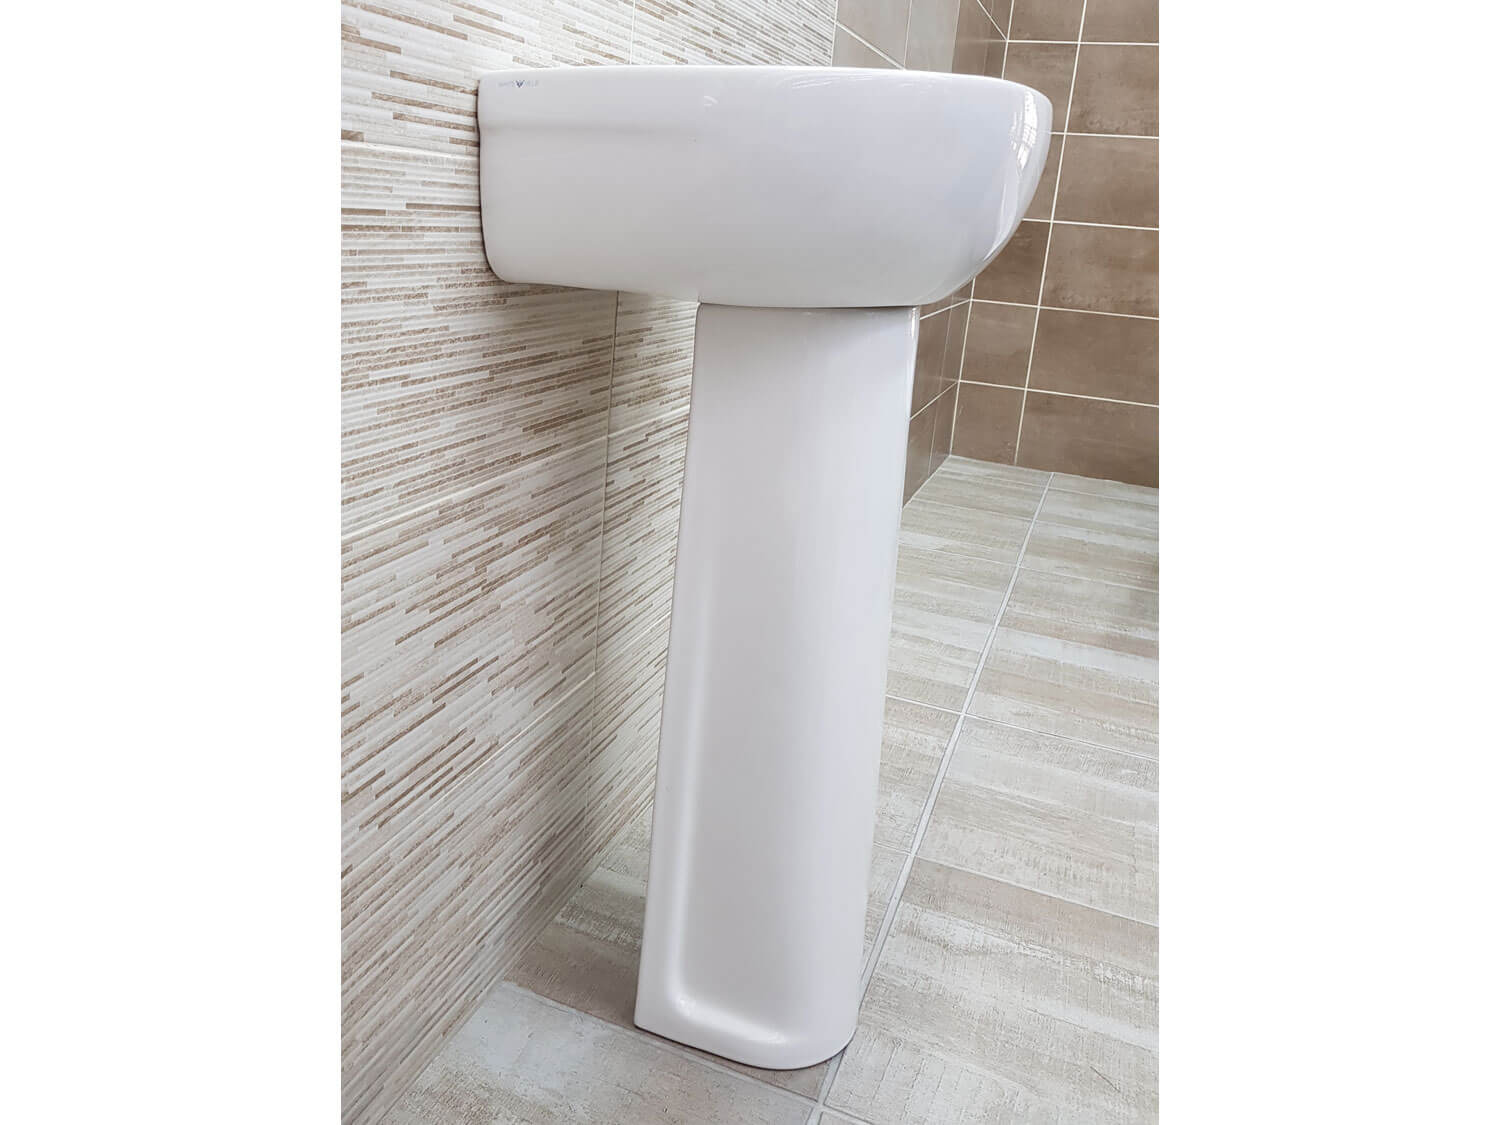 Delta White Wall Mounted Basin & Pedestal Set Side View